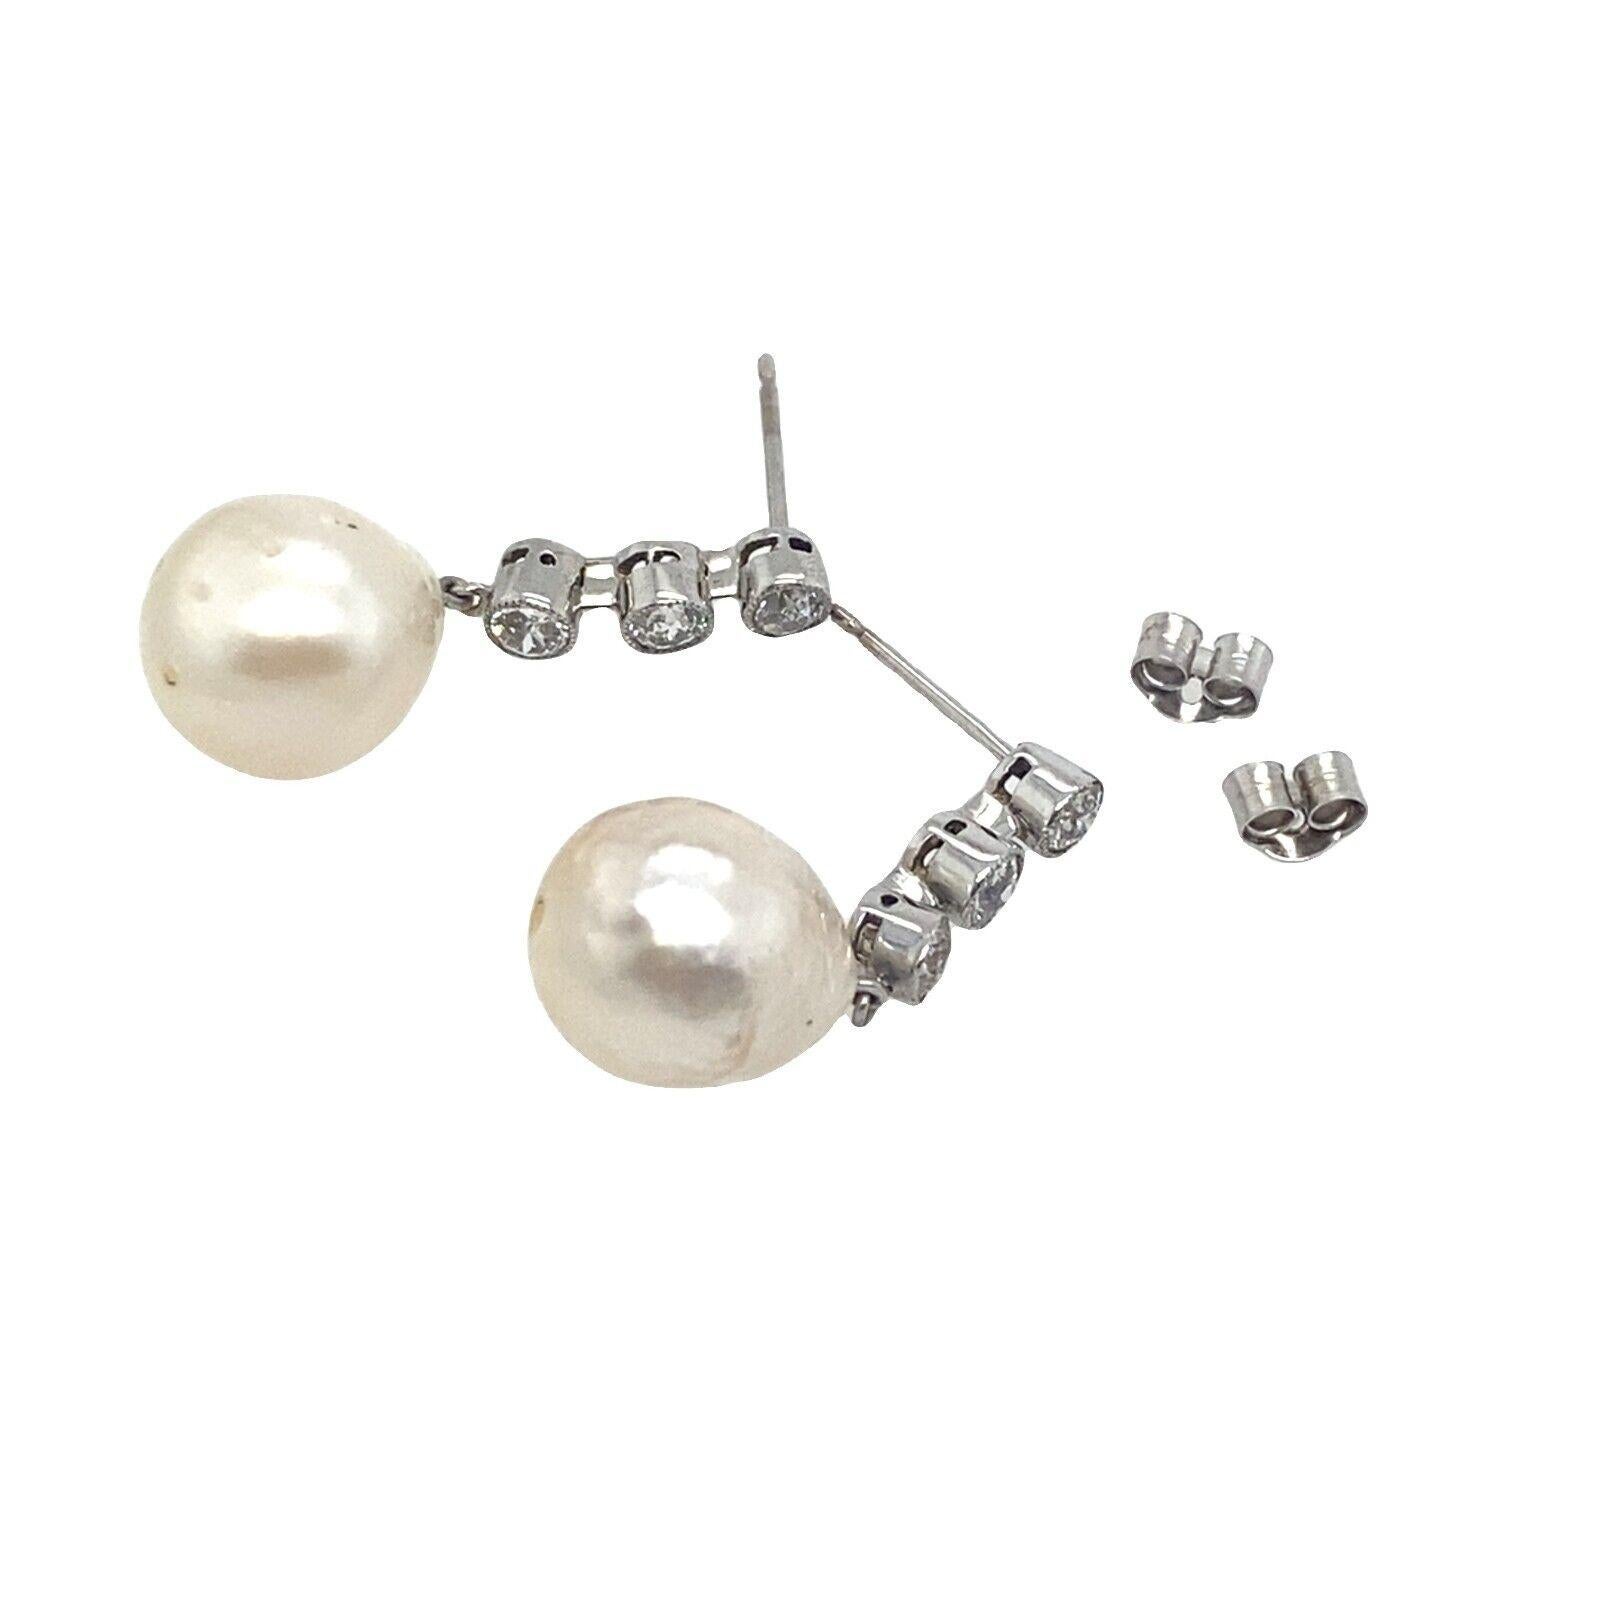 This is a pair of Victorian cut Diamond drop earrings set with 0.60ct Diamonds and 2 Cultured Pearls. This pair is a perfect choice for any occasion to wear as it is stylish and comfortable. It is crafted from 18ct White Gold with peg and screw